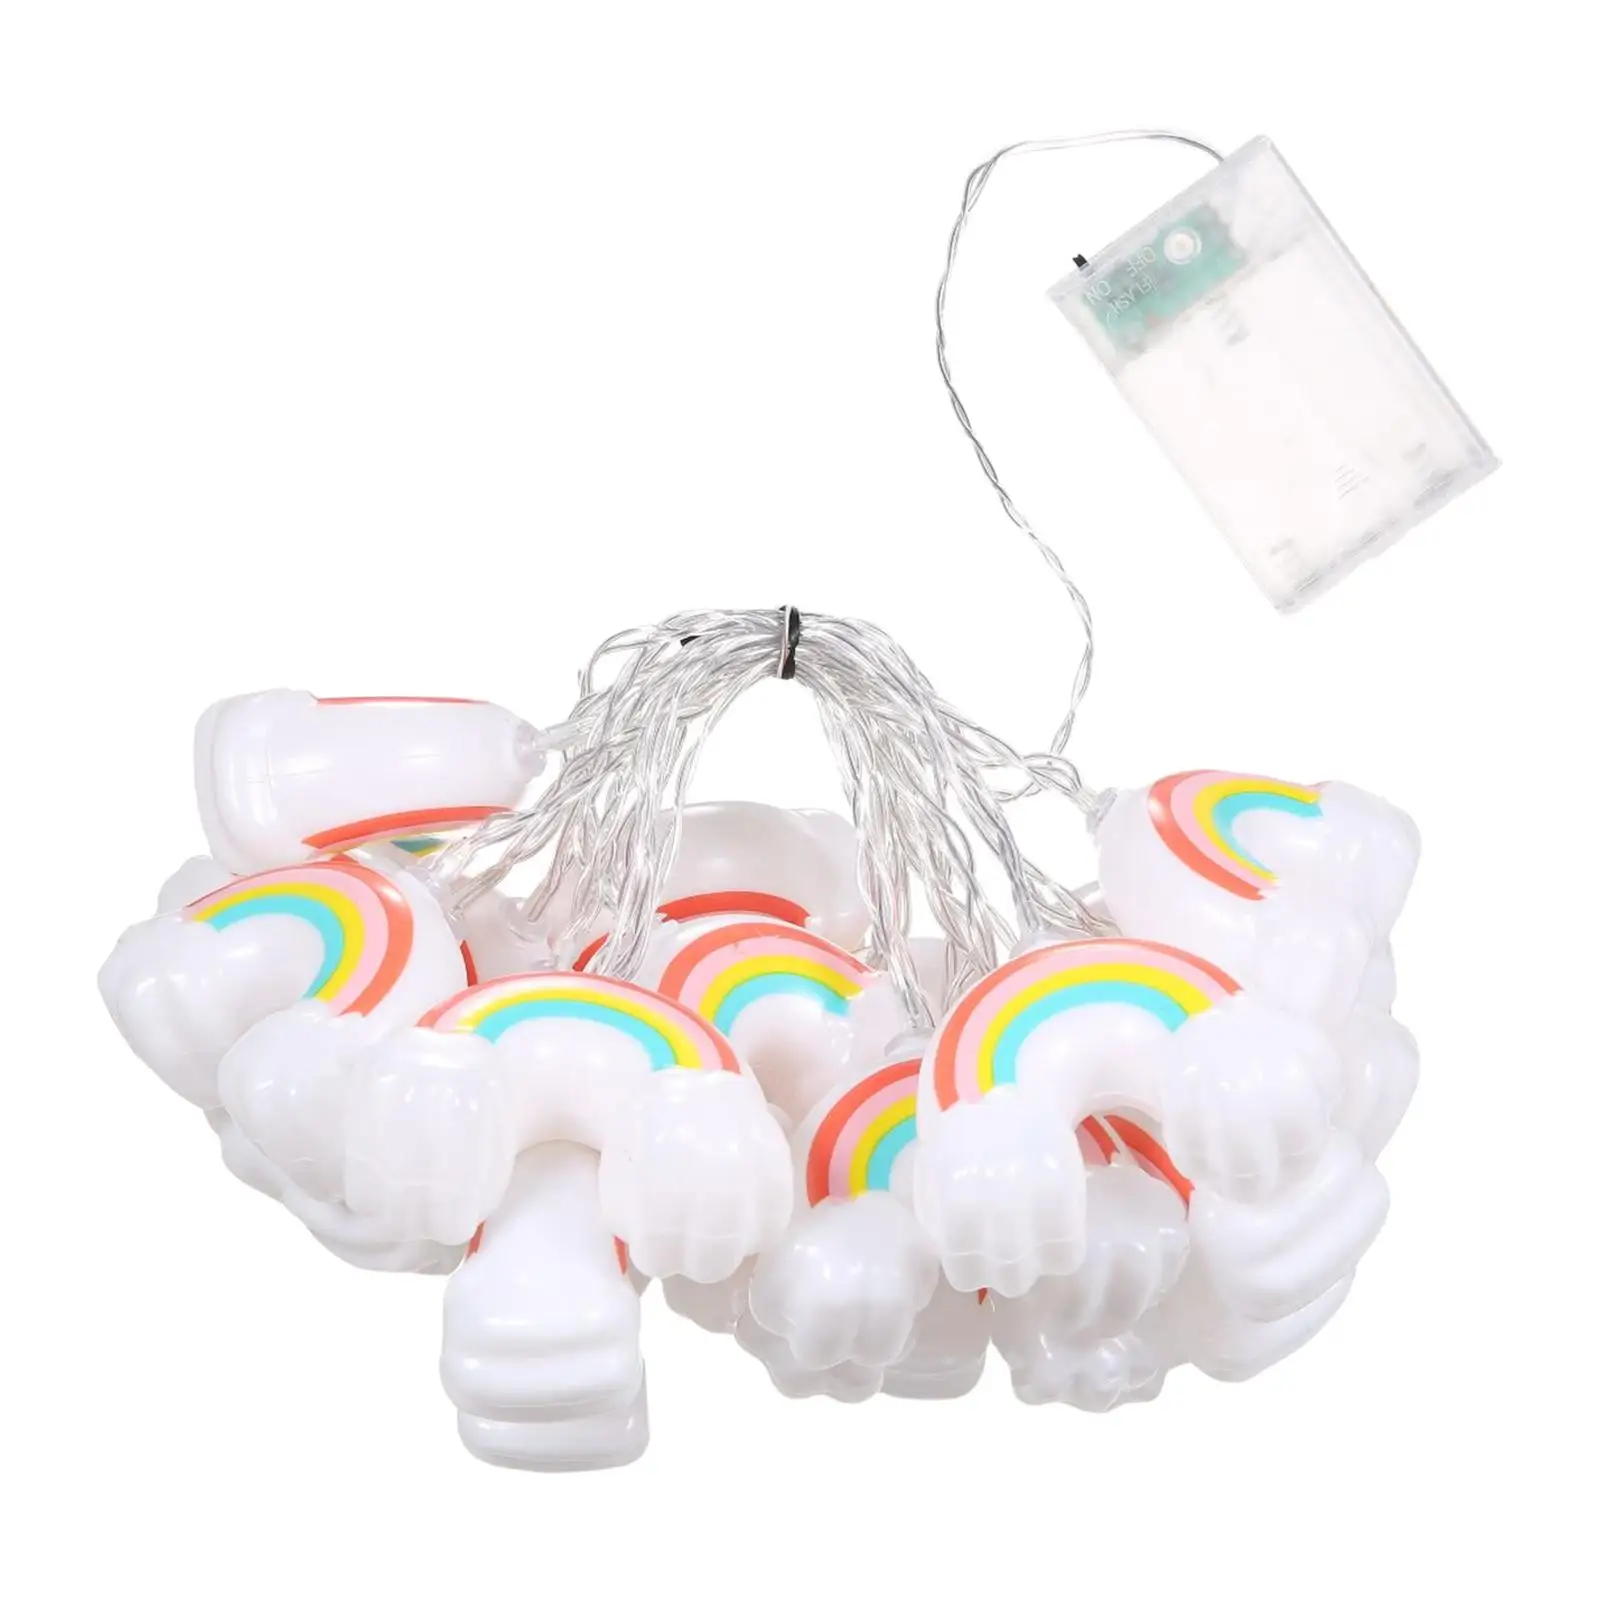 LED Rainbow String Lights Fairy Lights Funny Waterproof DIY Lamp for Outdoor Patio Summer Beach Camping Wedding Home Ornaments